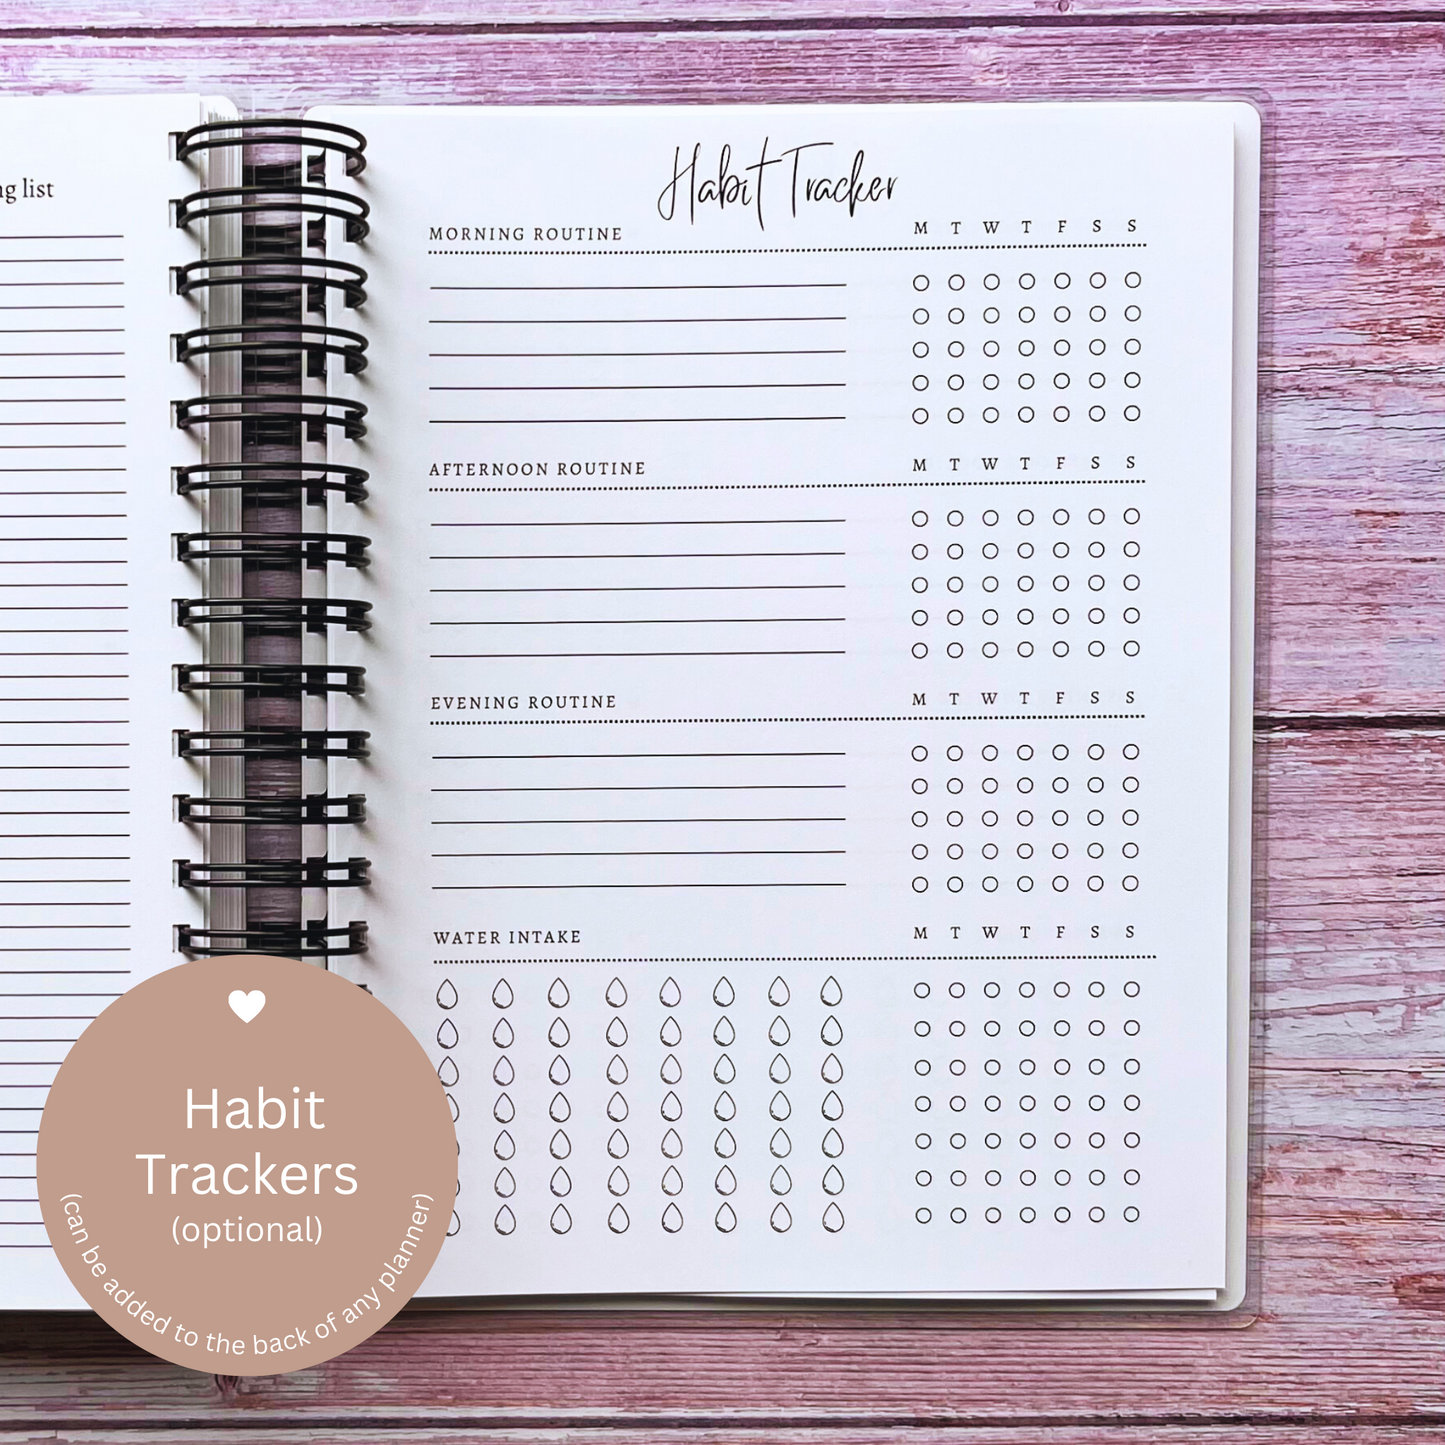 Personalized Monthly Planner - Mystical Eye